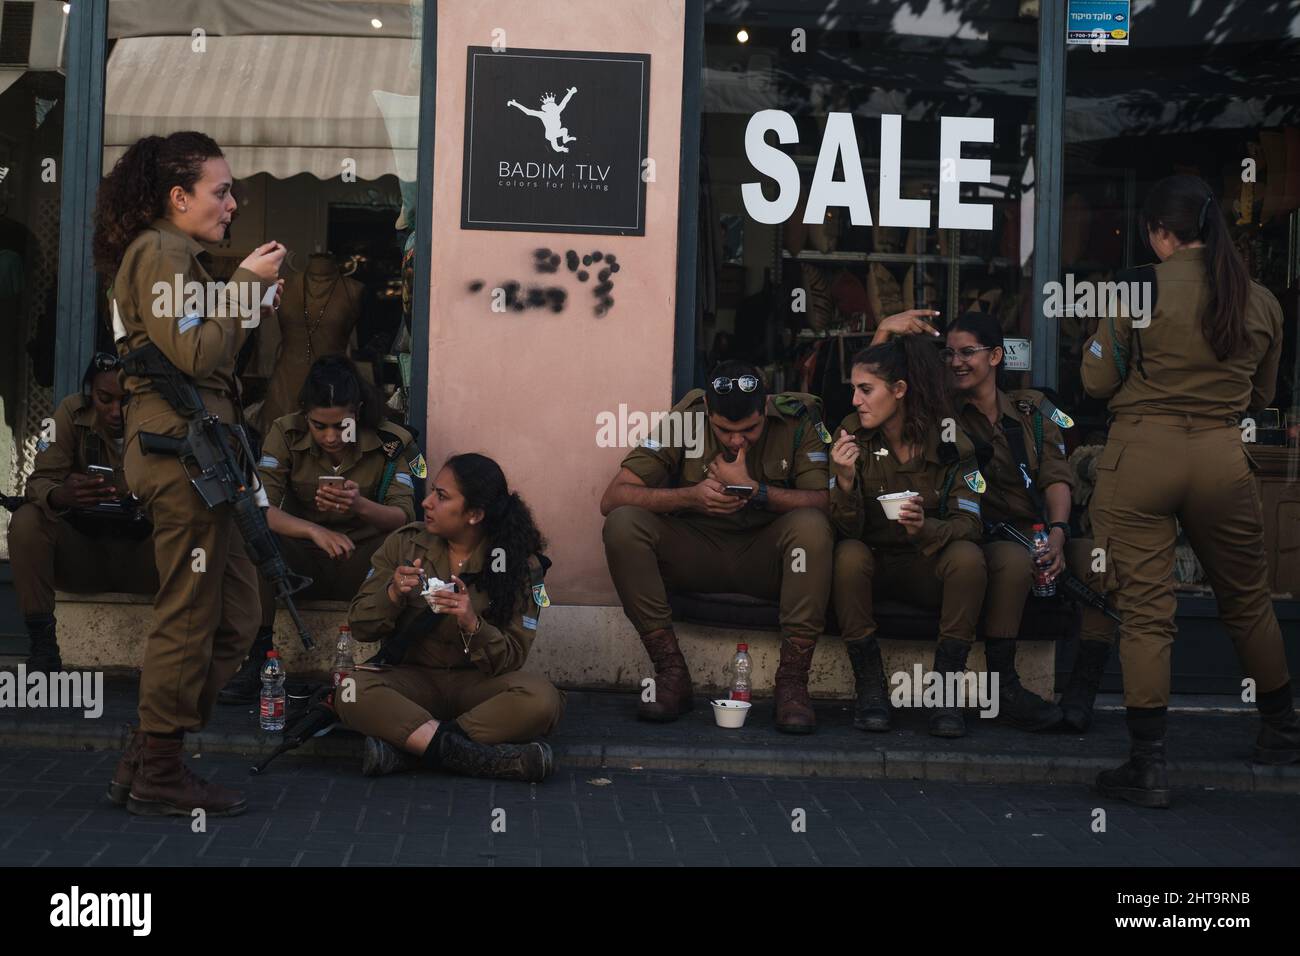 Closeup of women in army clothes in Israel Stock Photo